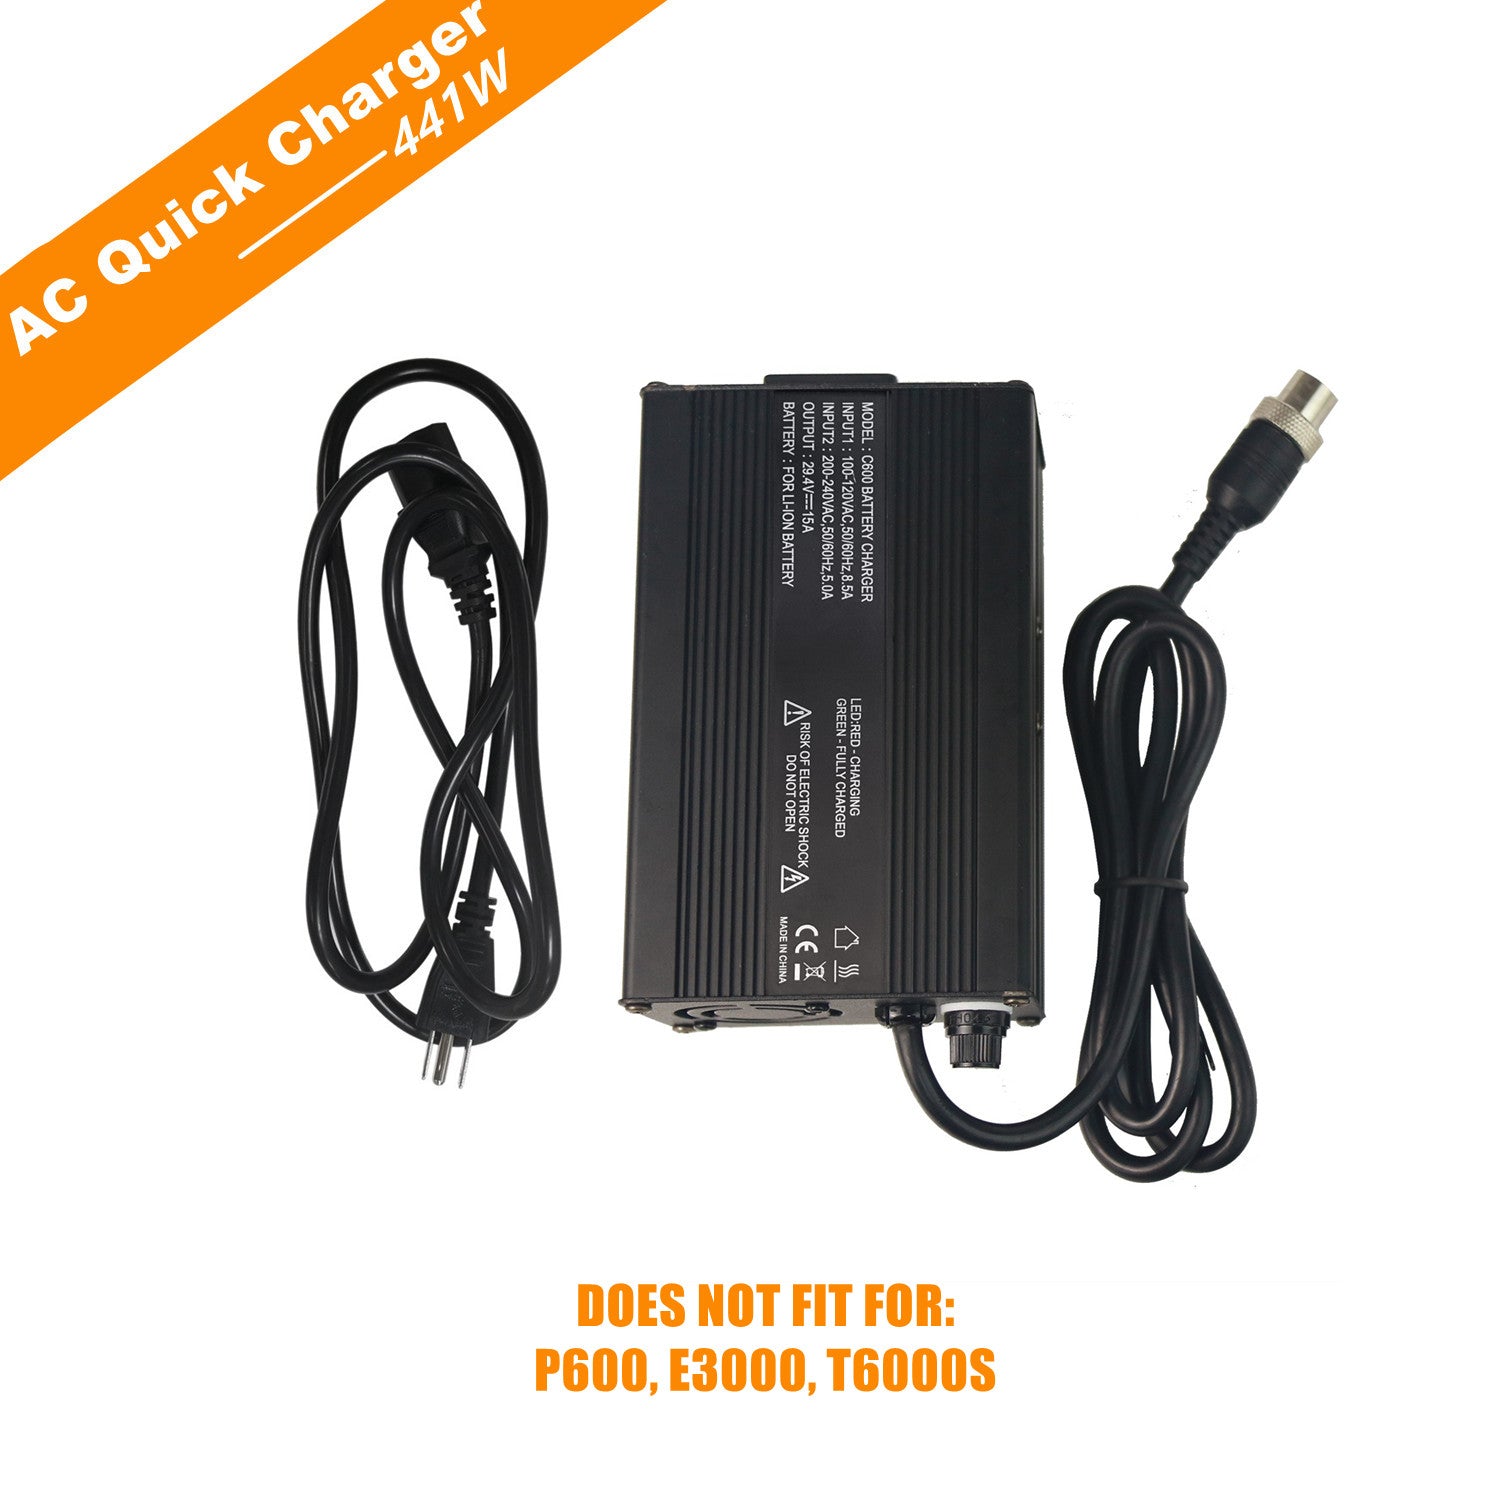 PECRON Universal 441W AC Super Quick Charger for S1500 Q2000S 4-Pin Port